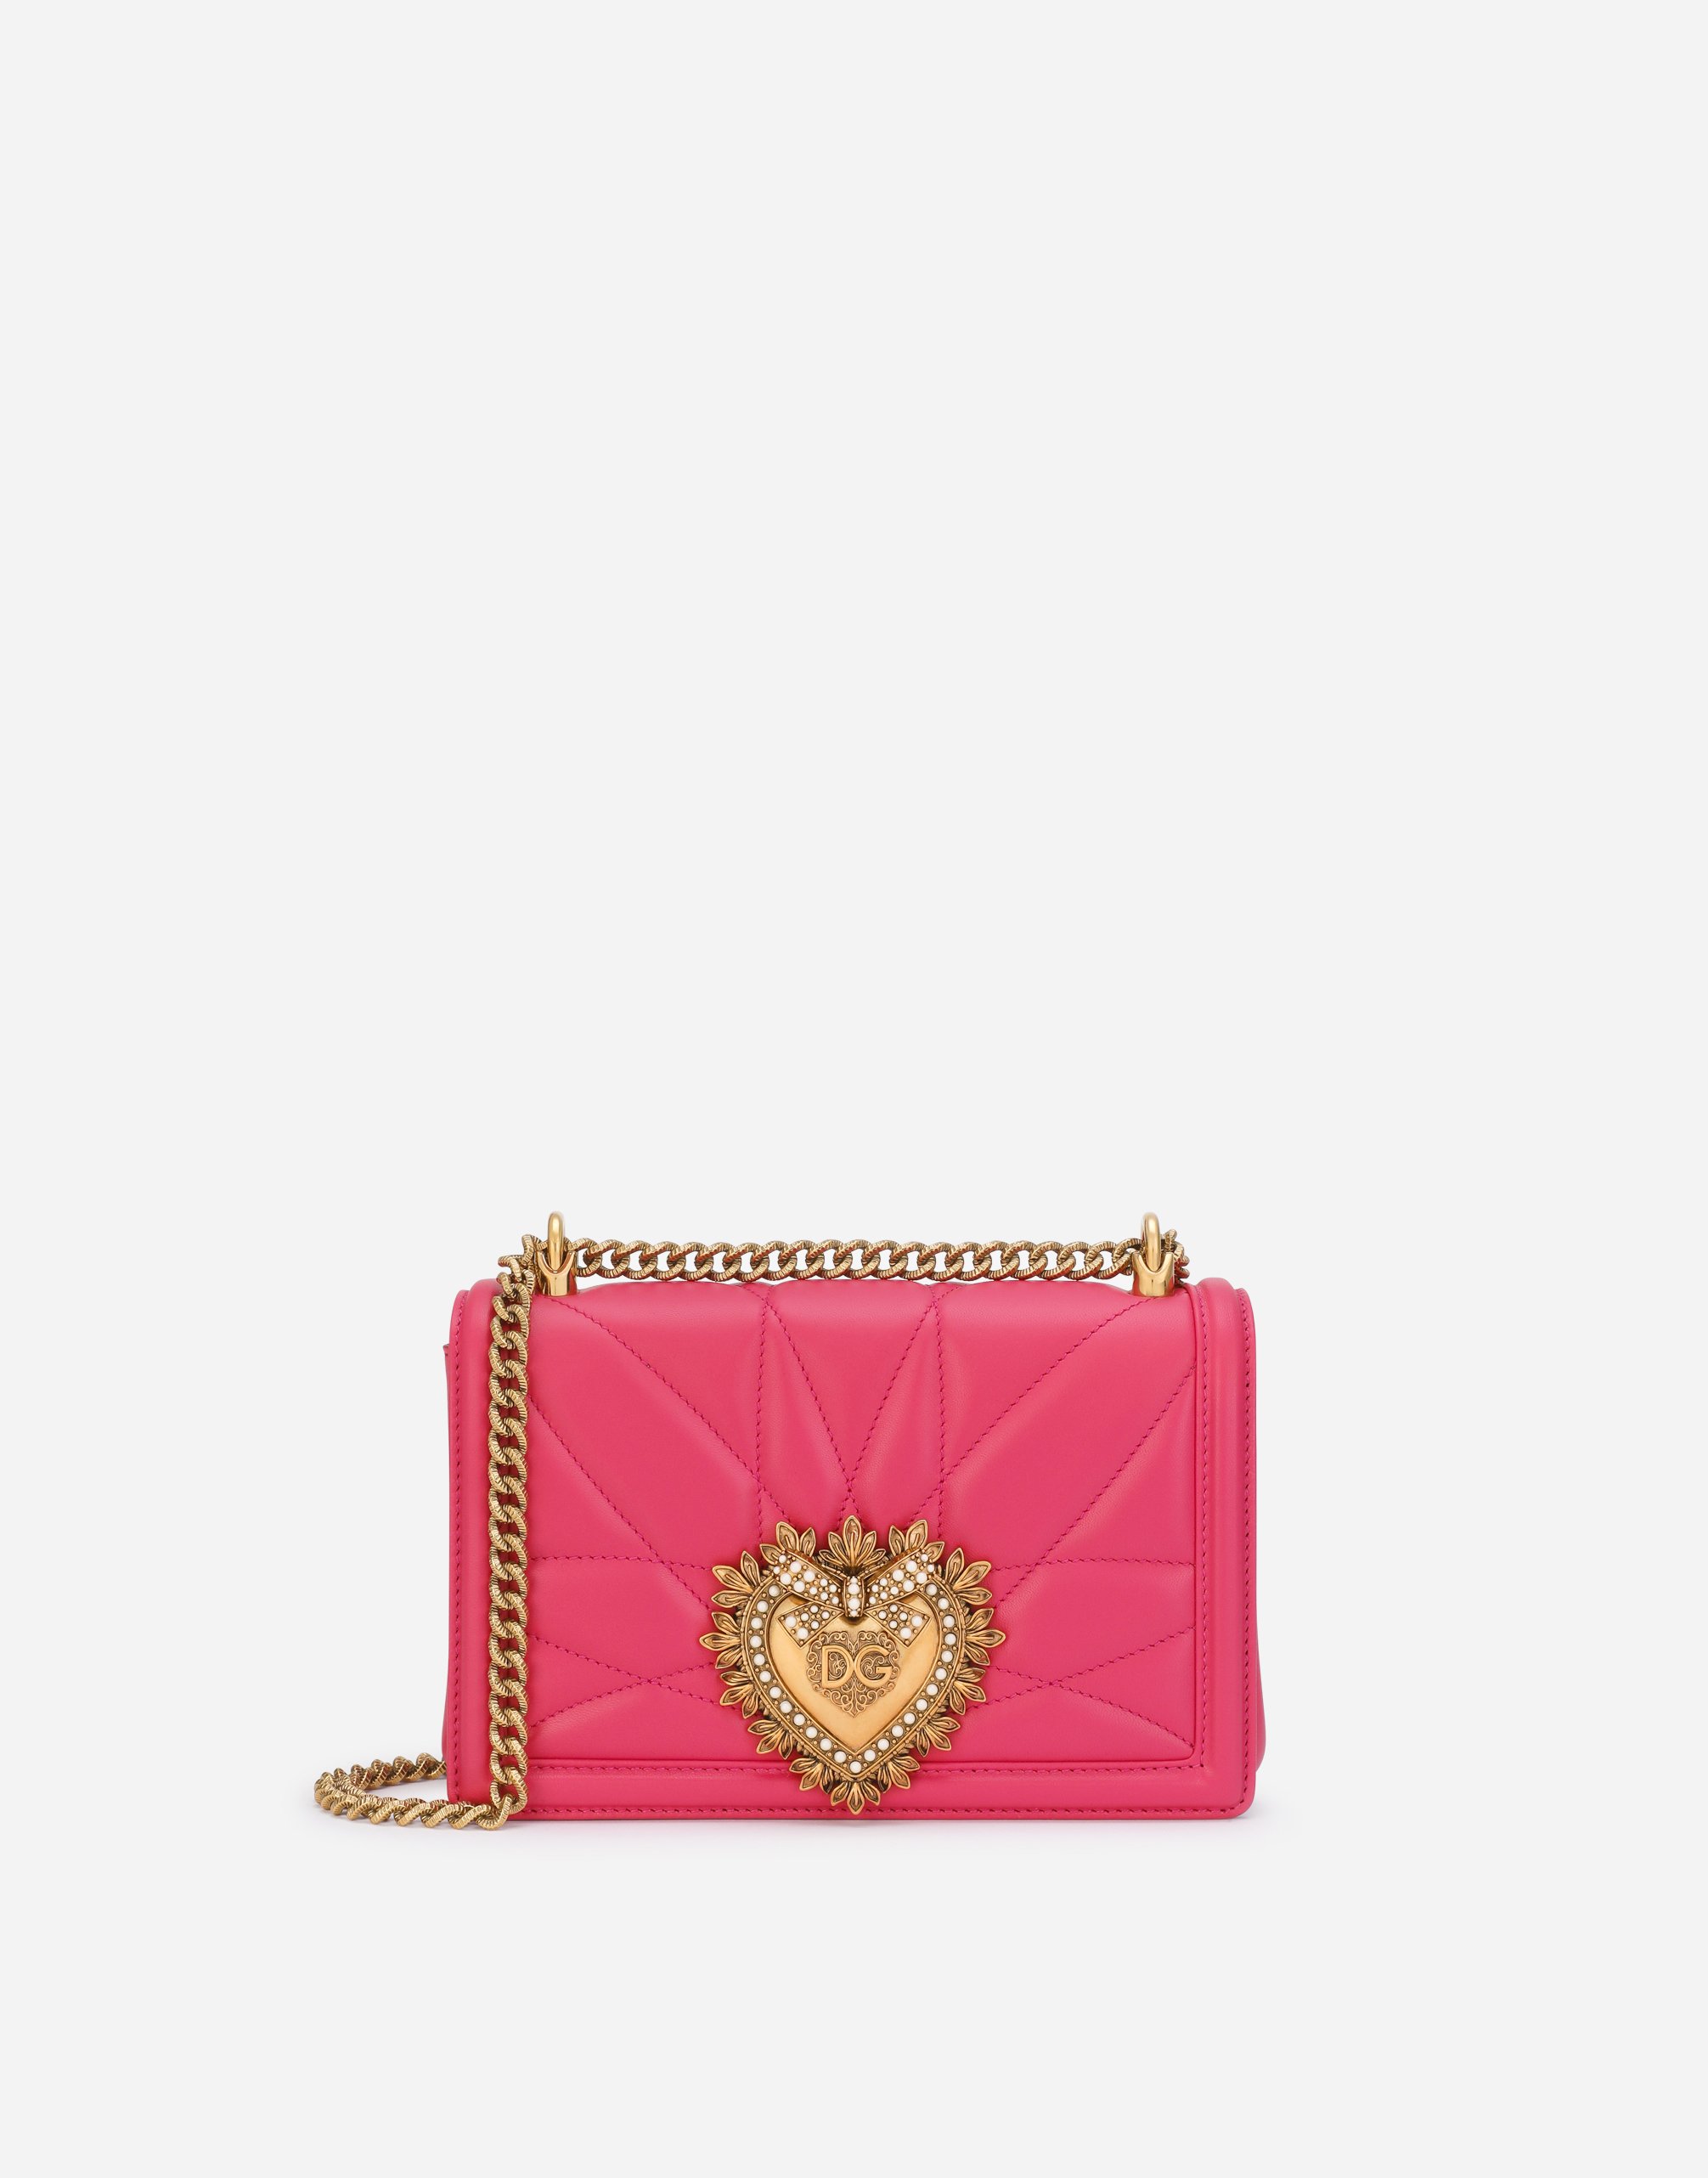 Medium Devotion bag in quilted nappa leather in Fuchsia